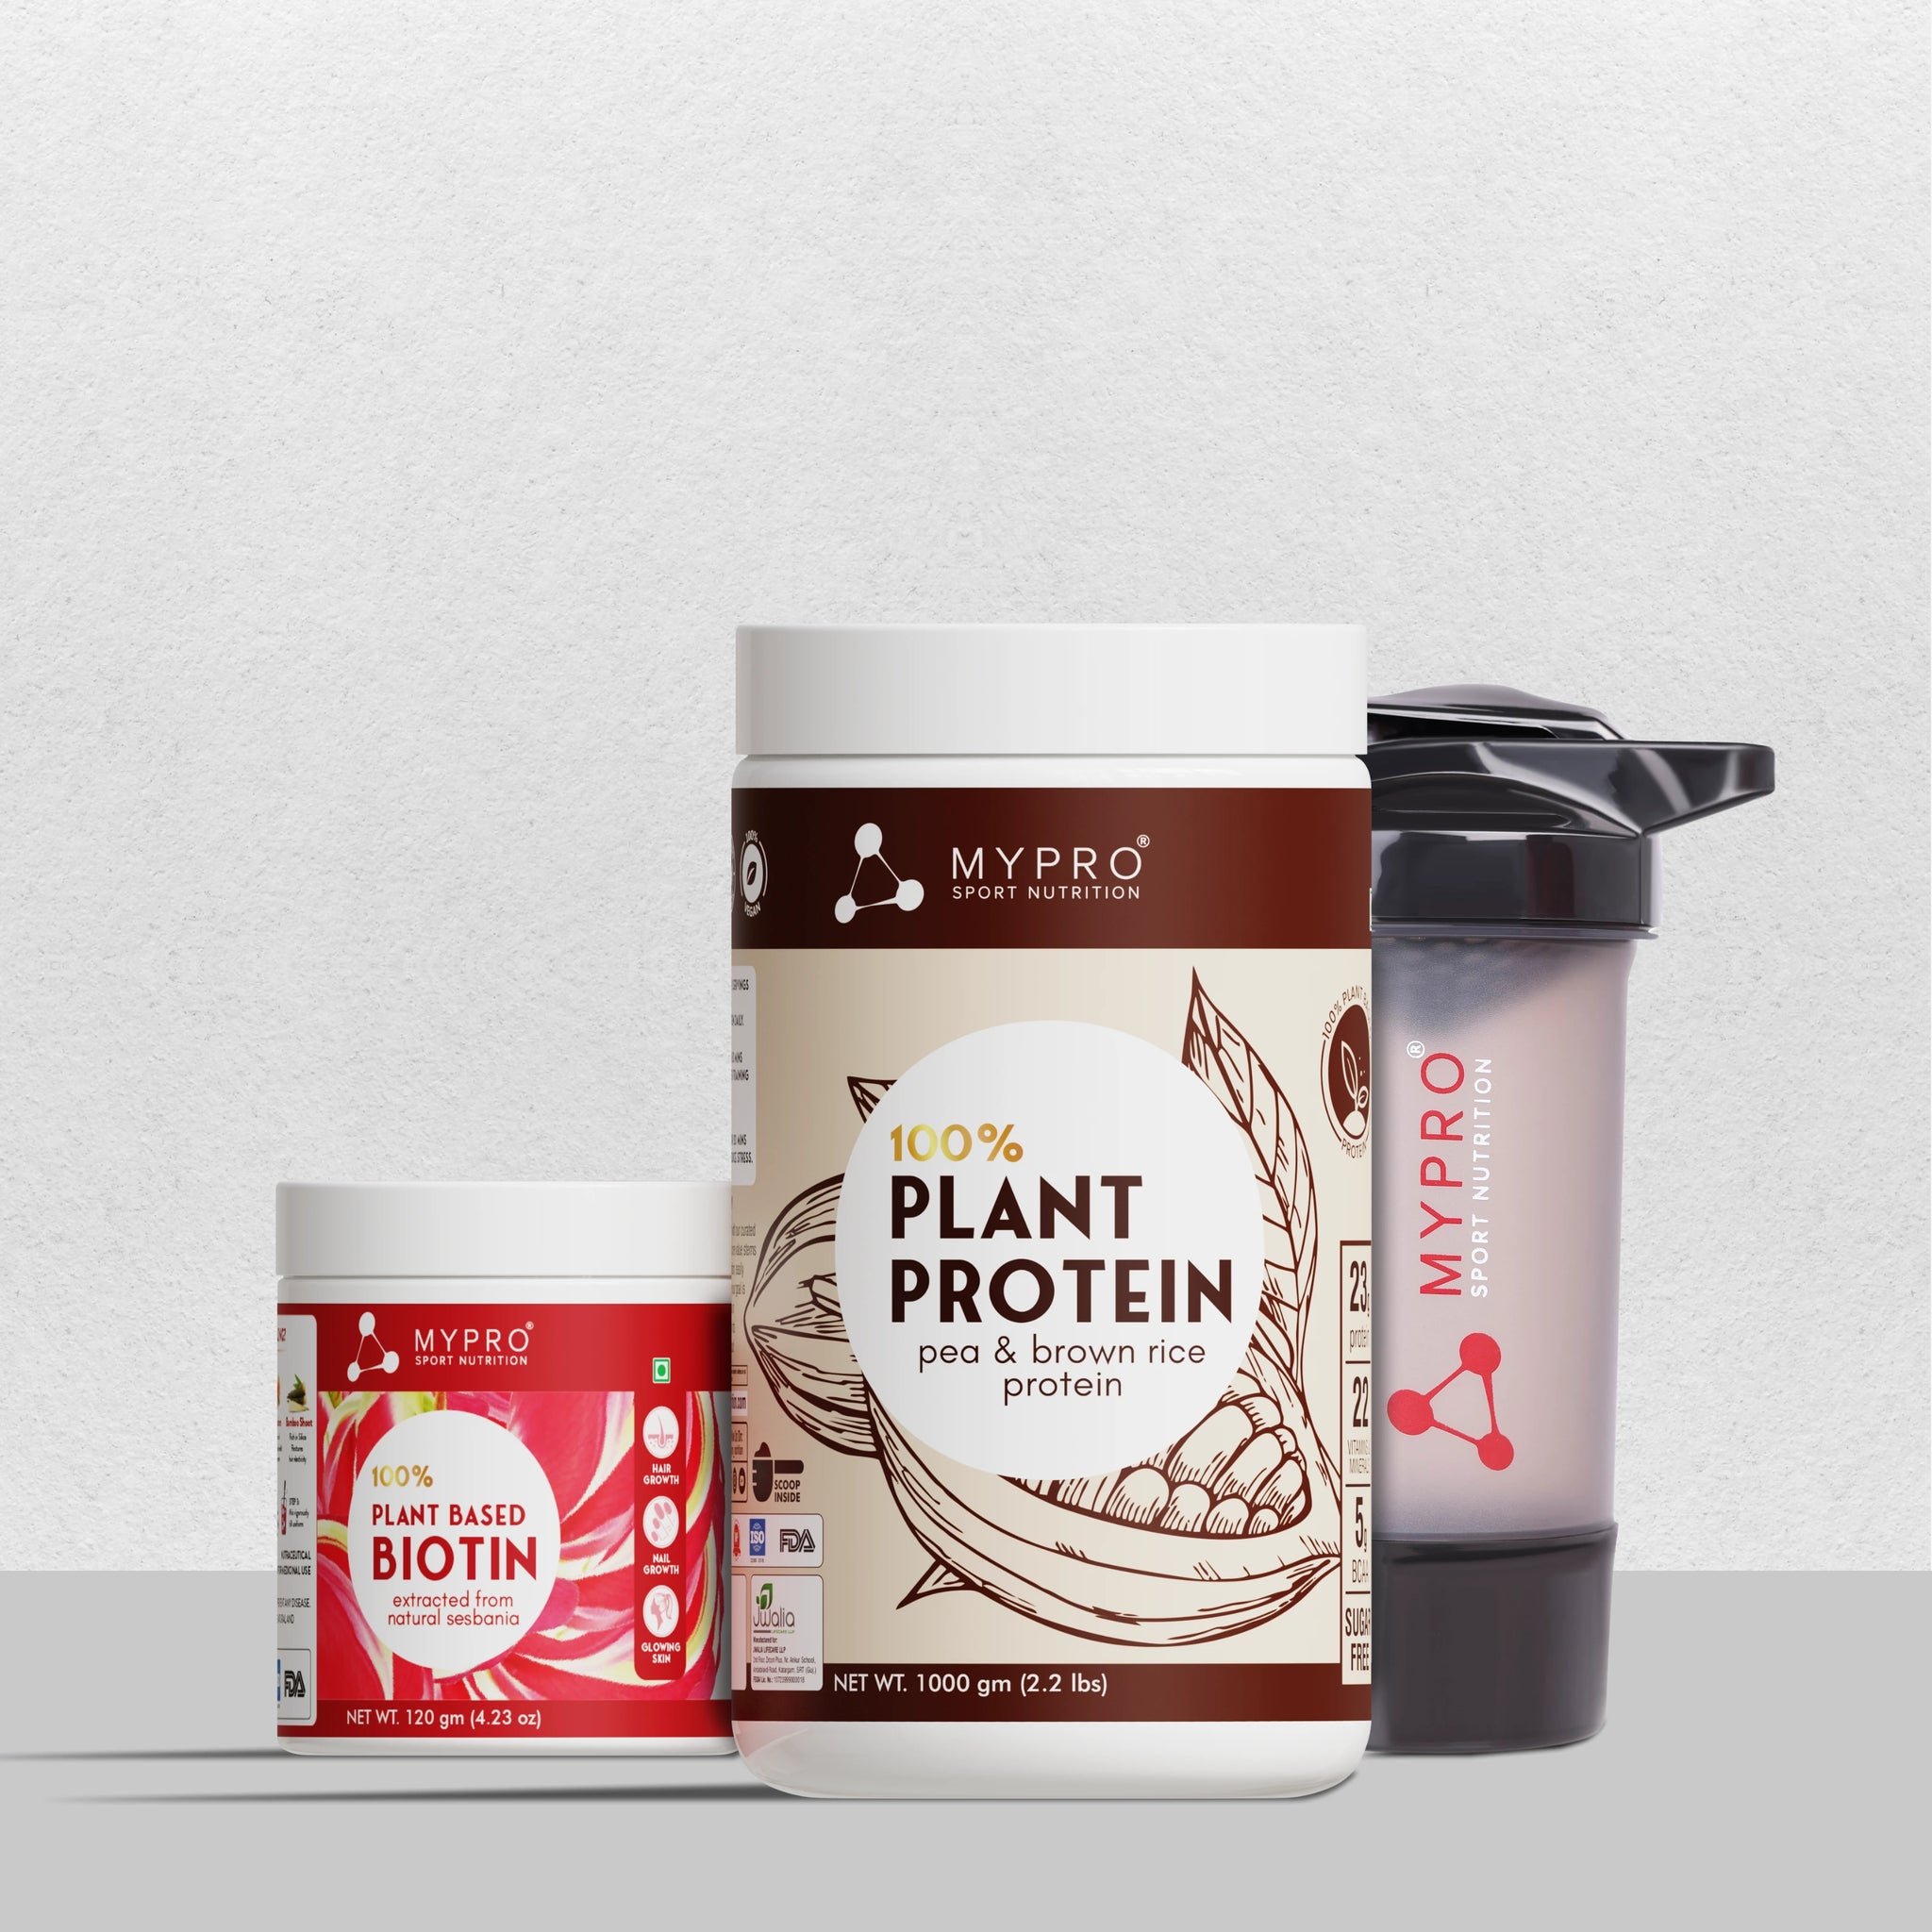 Combo of 100% Plant Protein - Pea & Brown Rice Protein + 100% Plant Based Biotin & Gym Shaker Bottle